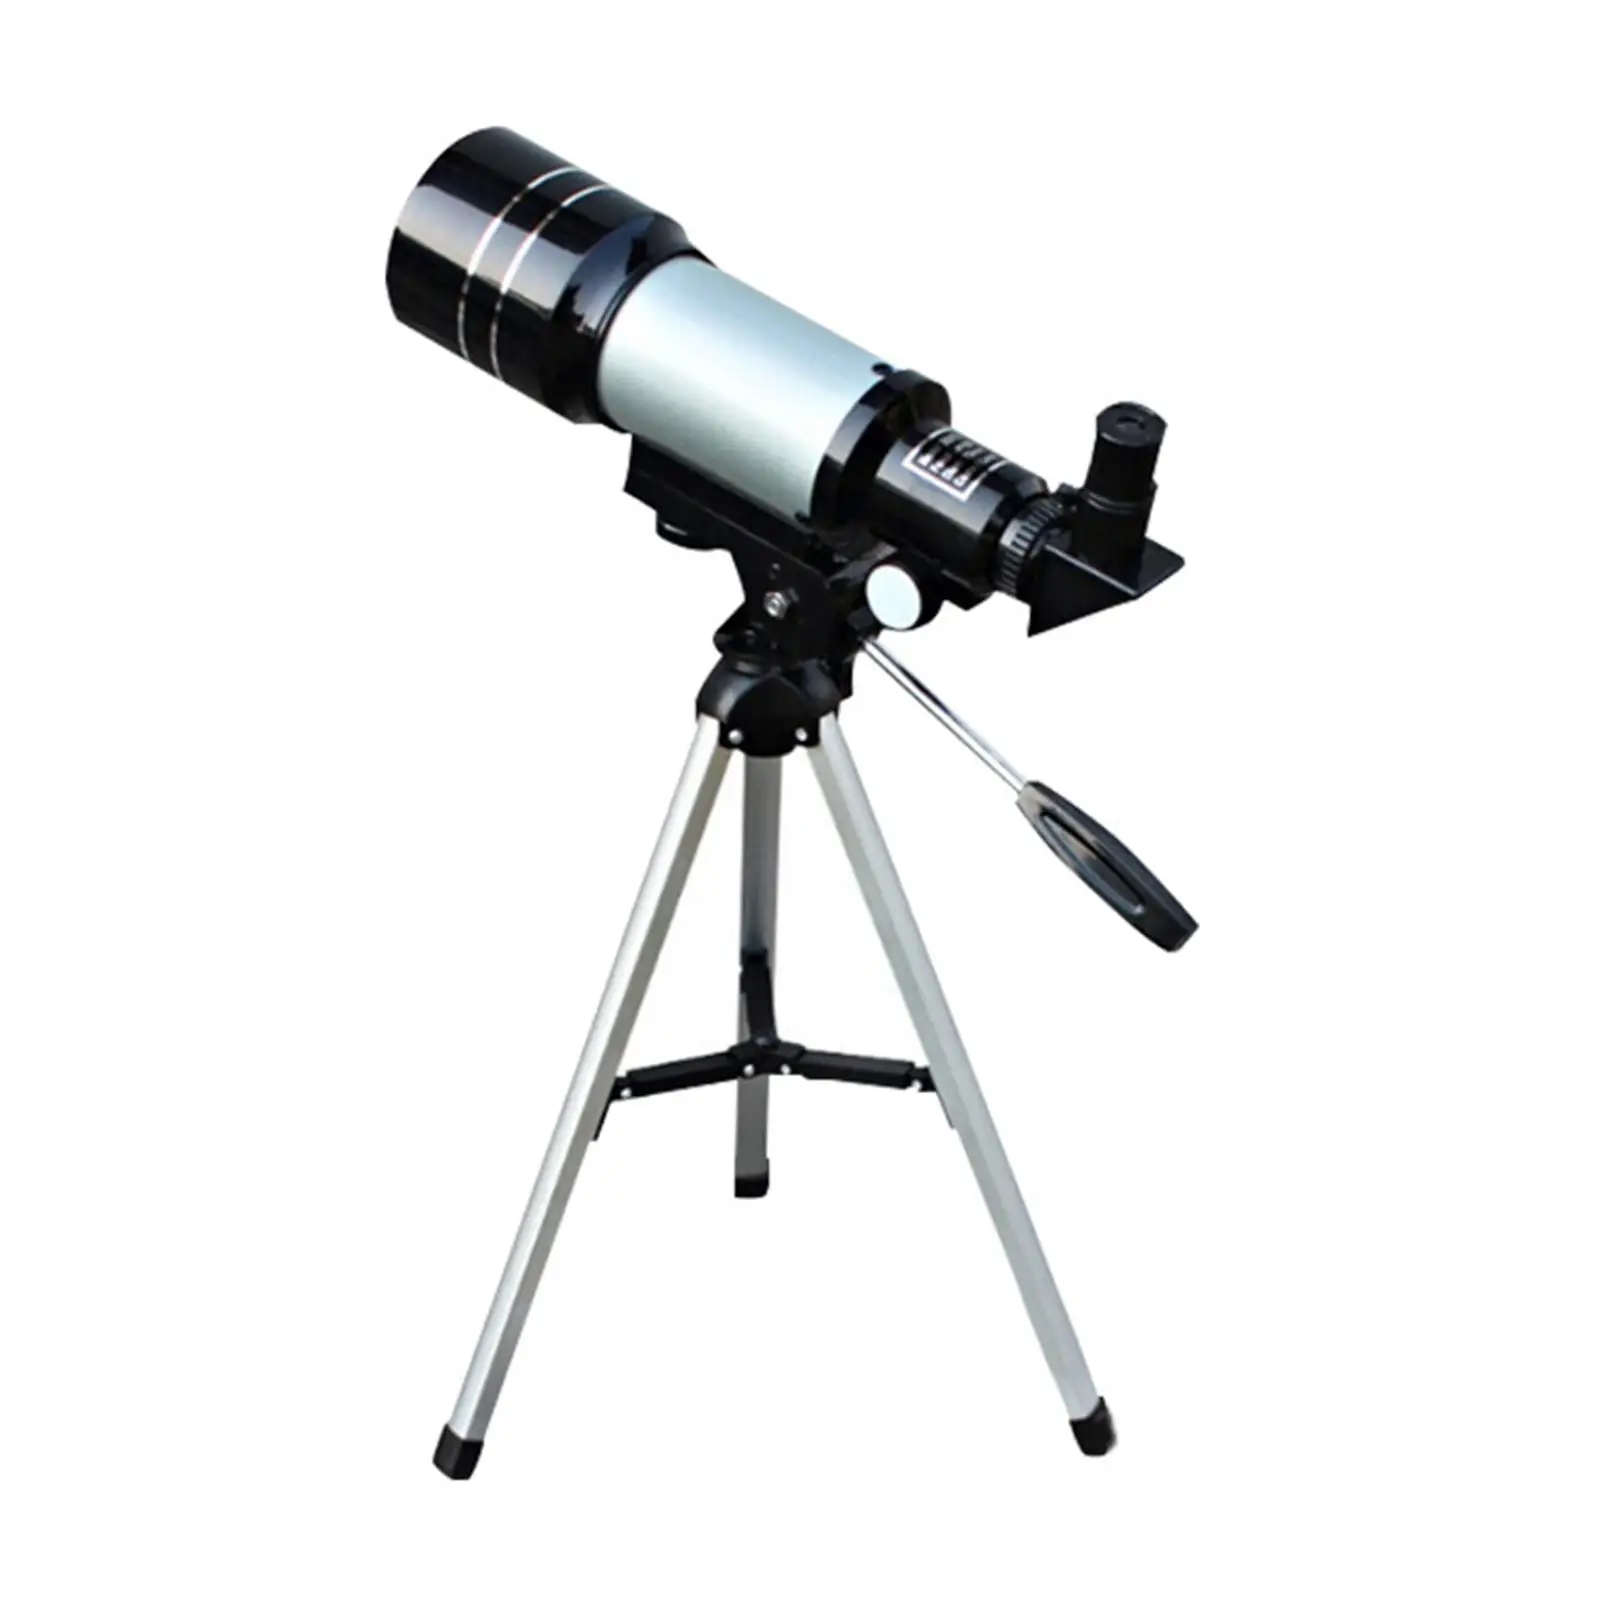 70mm Aperture 300mm Focal Telescope with Tripod for Beginners ,to Watch Wildlife and Landscapes During The Day Accessory Durable